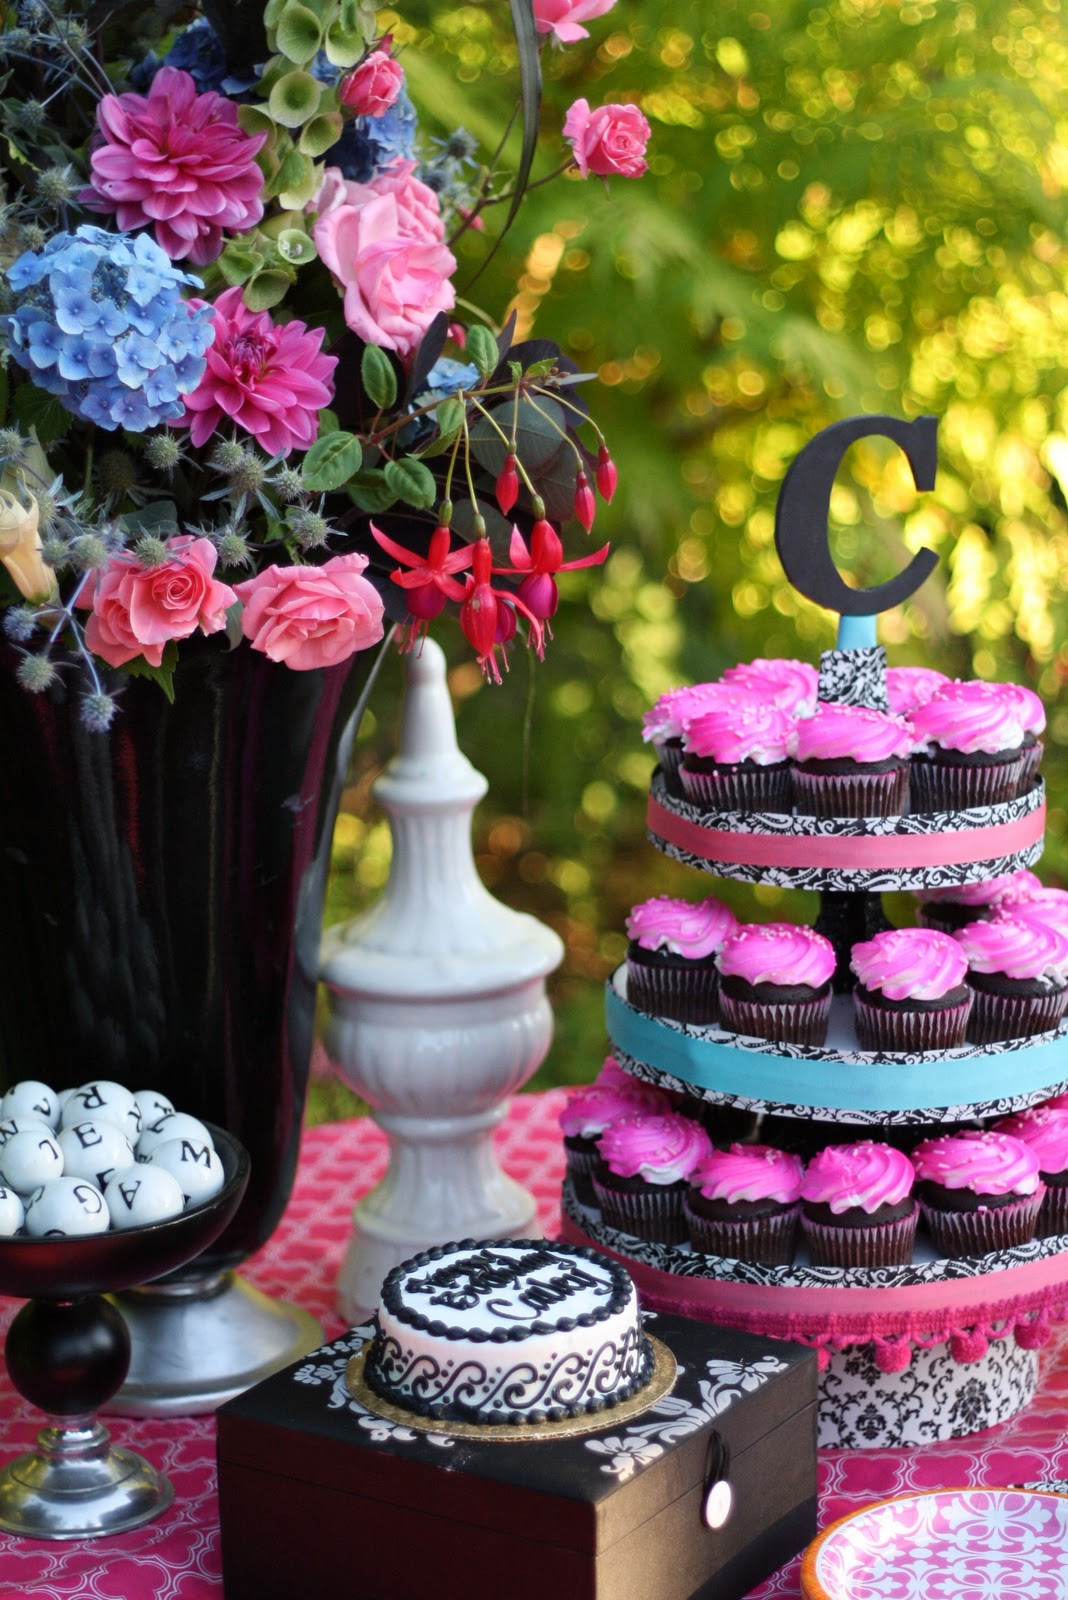 Birthday Gift Ideas For A Girl
 Picnic Party Birthday Ideas For Girls